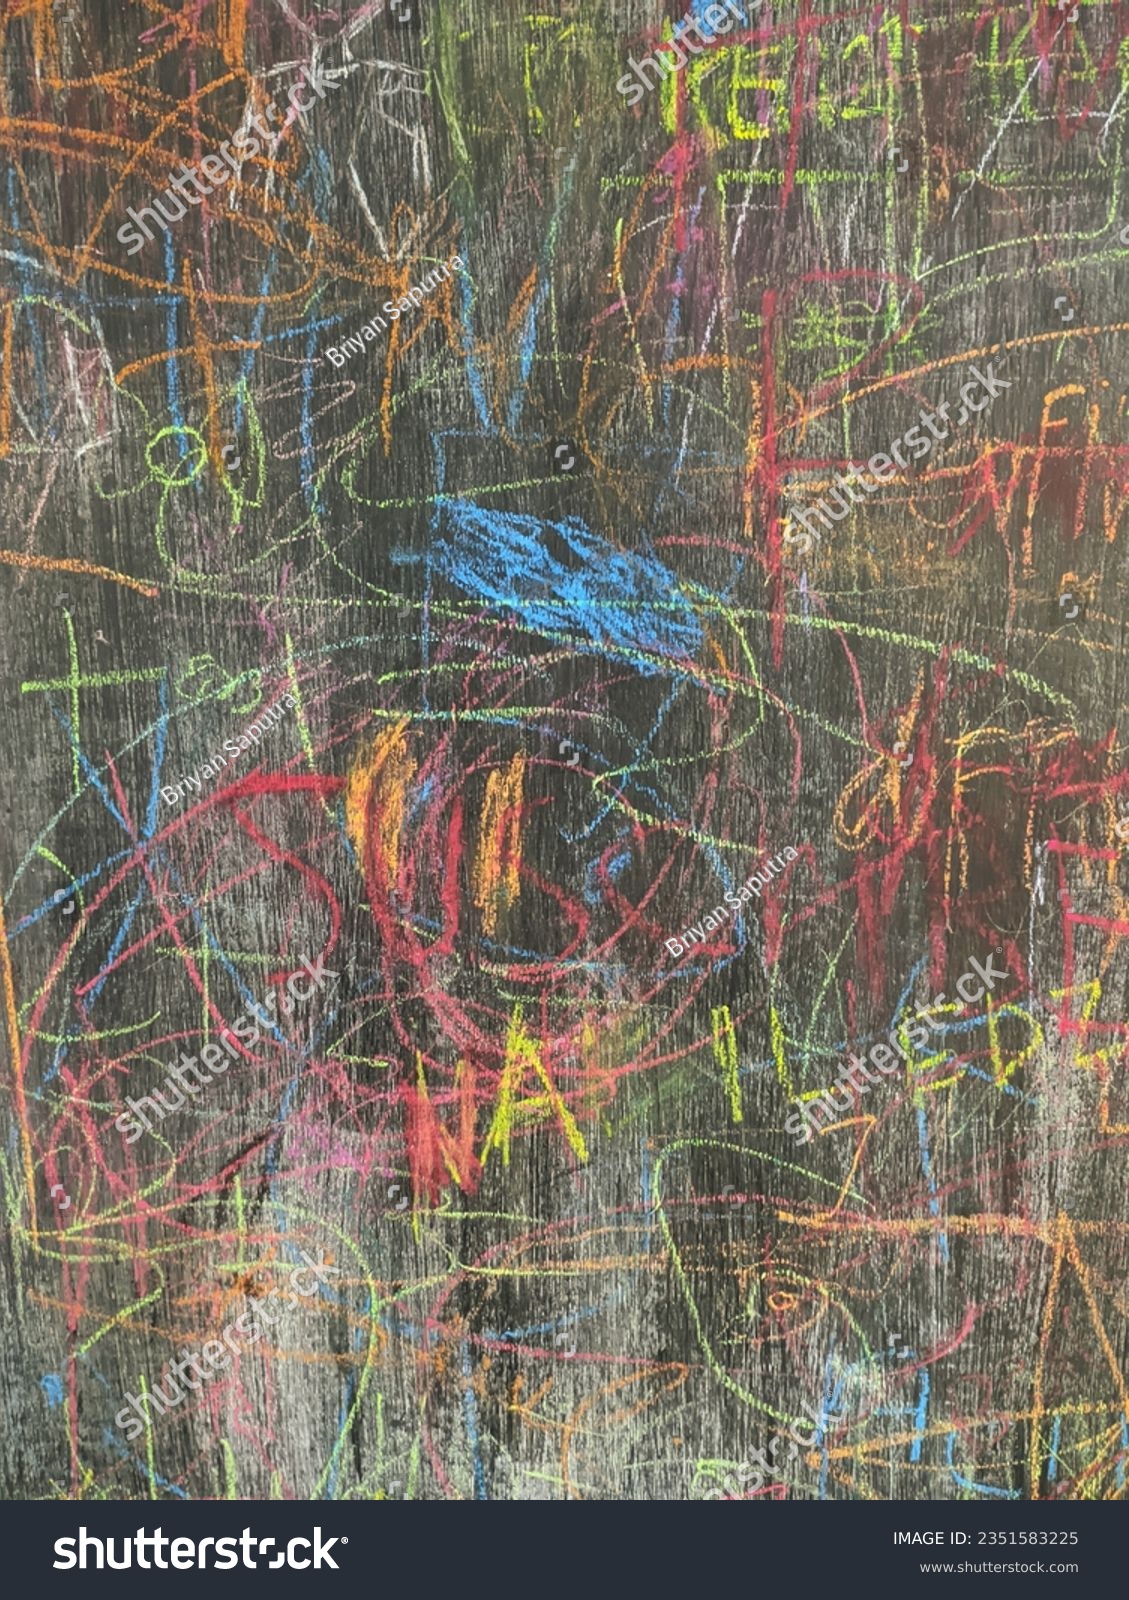 Colorful doodles on a blackboard, crossed out with colored chalk. #2351583225